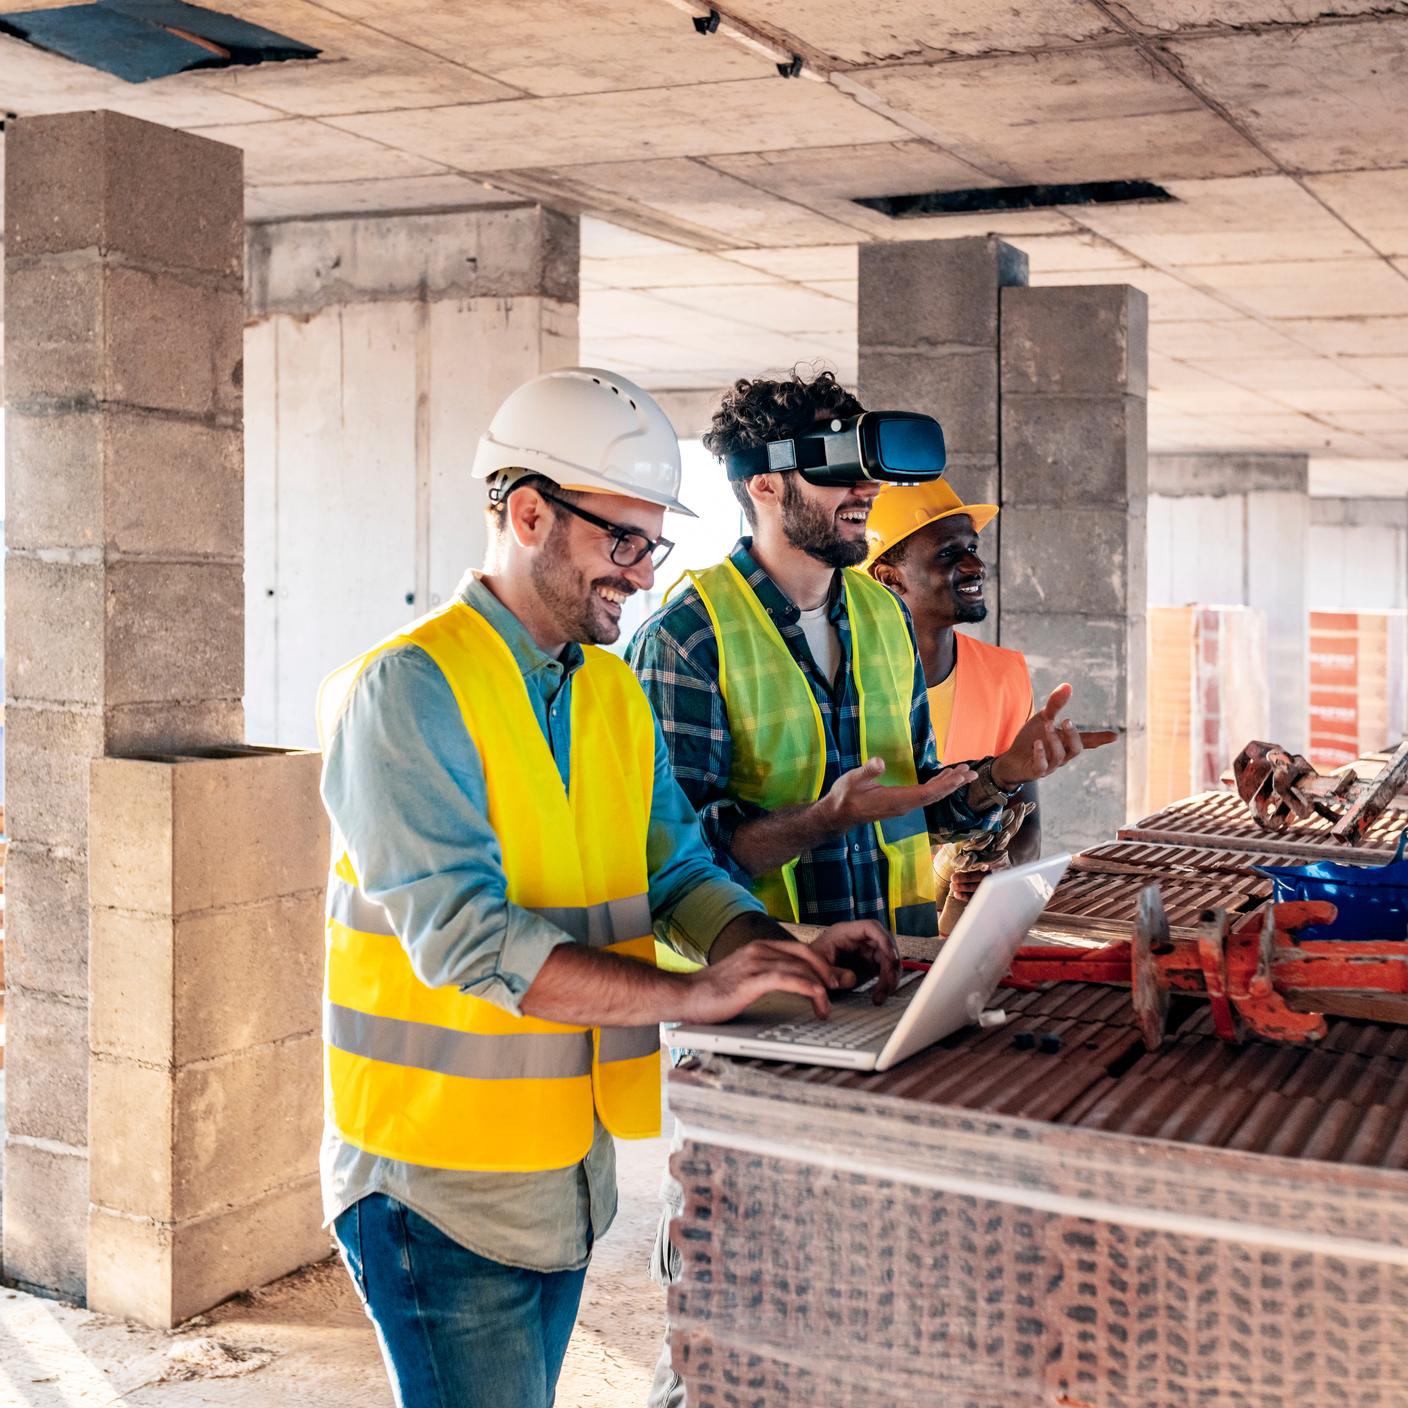 Engineering team in a building under construction using virtual reality goggles and computers